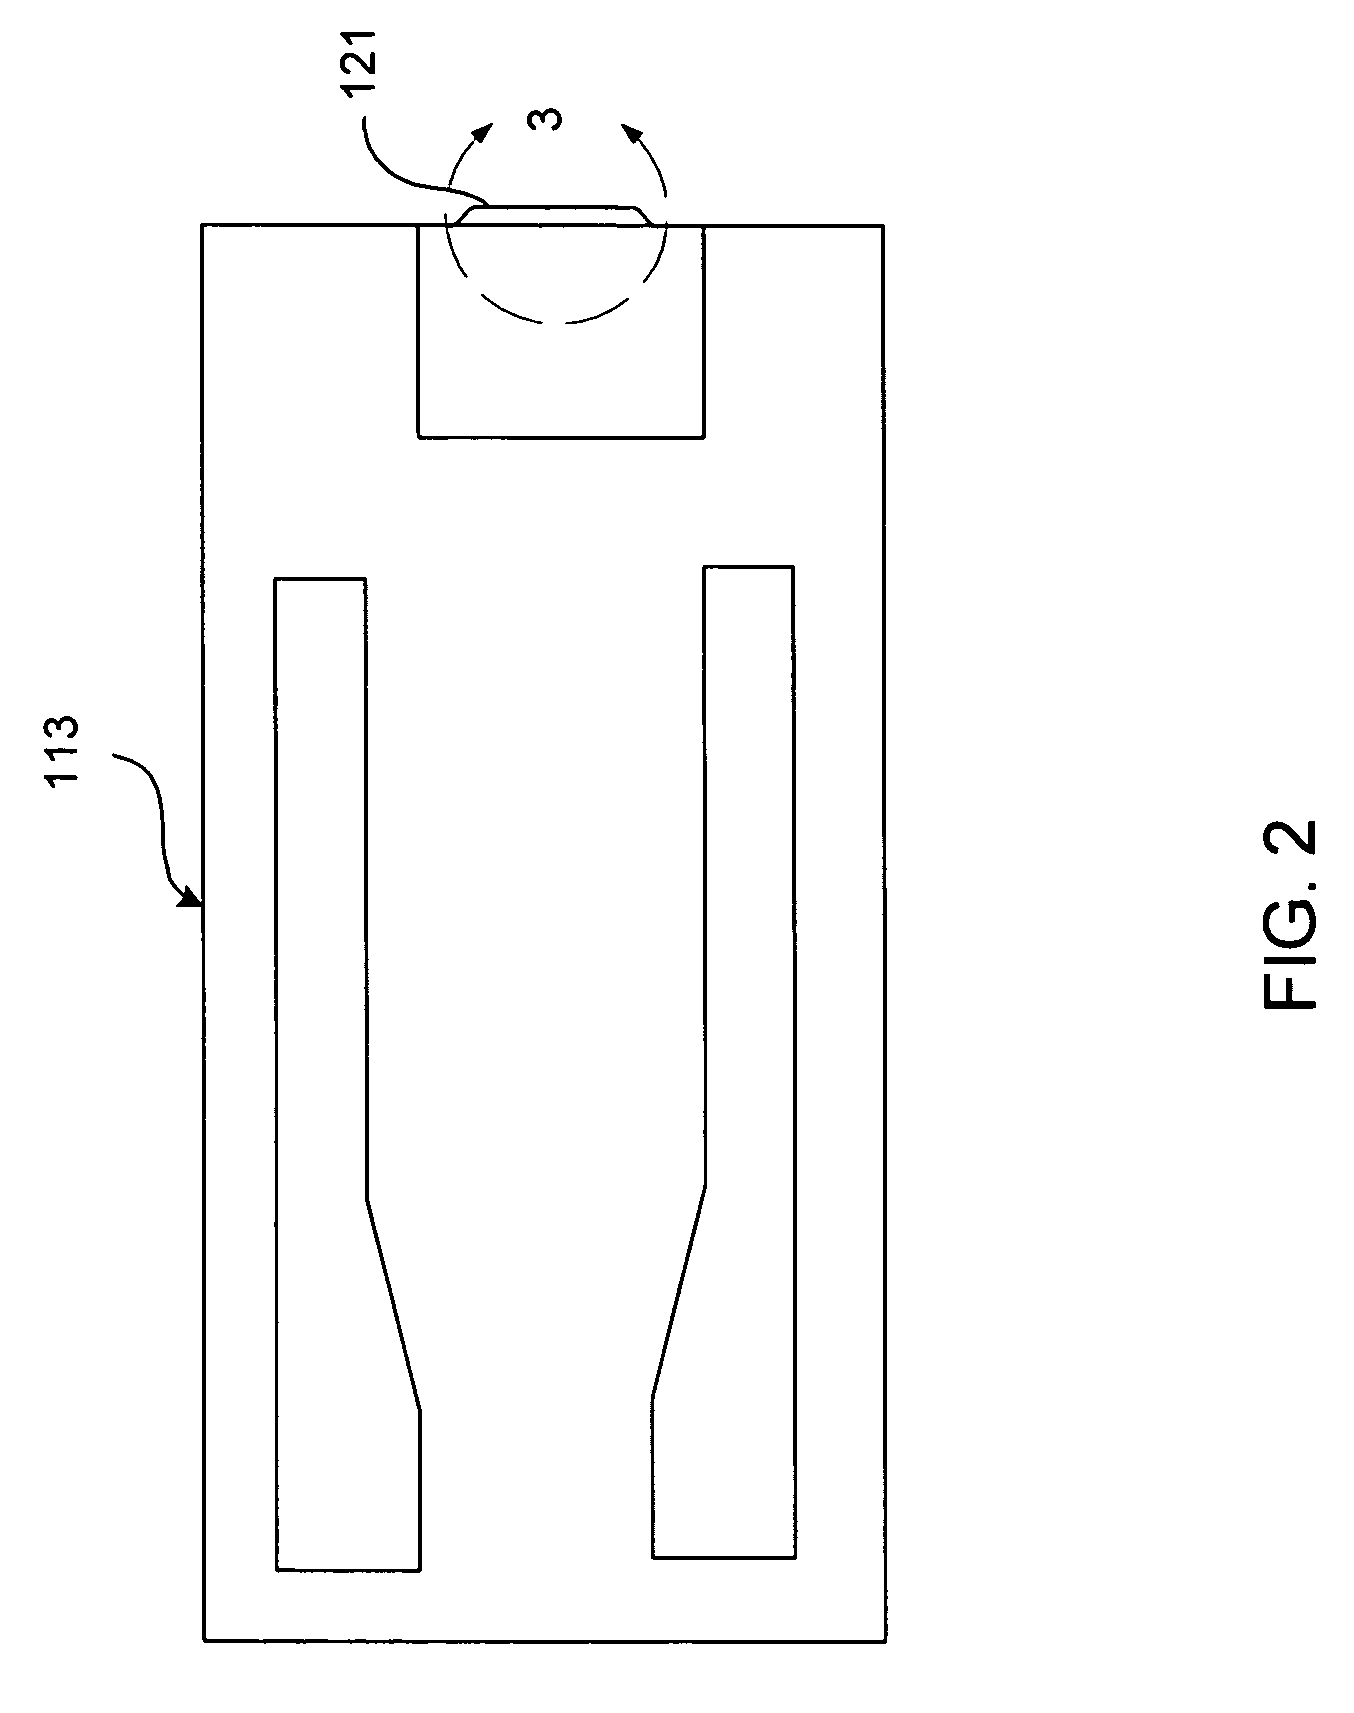 Trilayer SAF with current confining layer